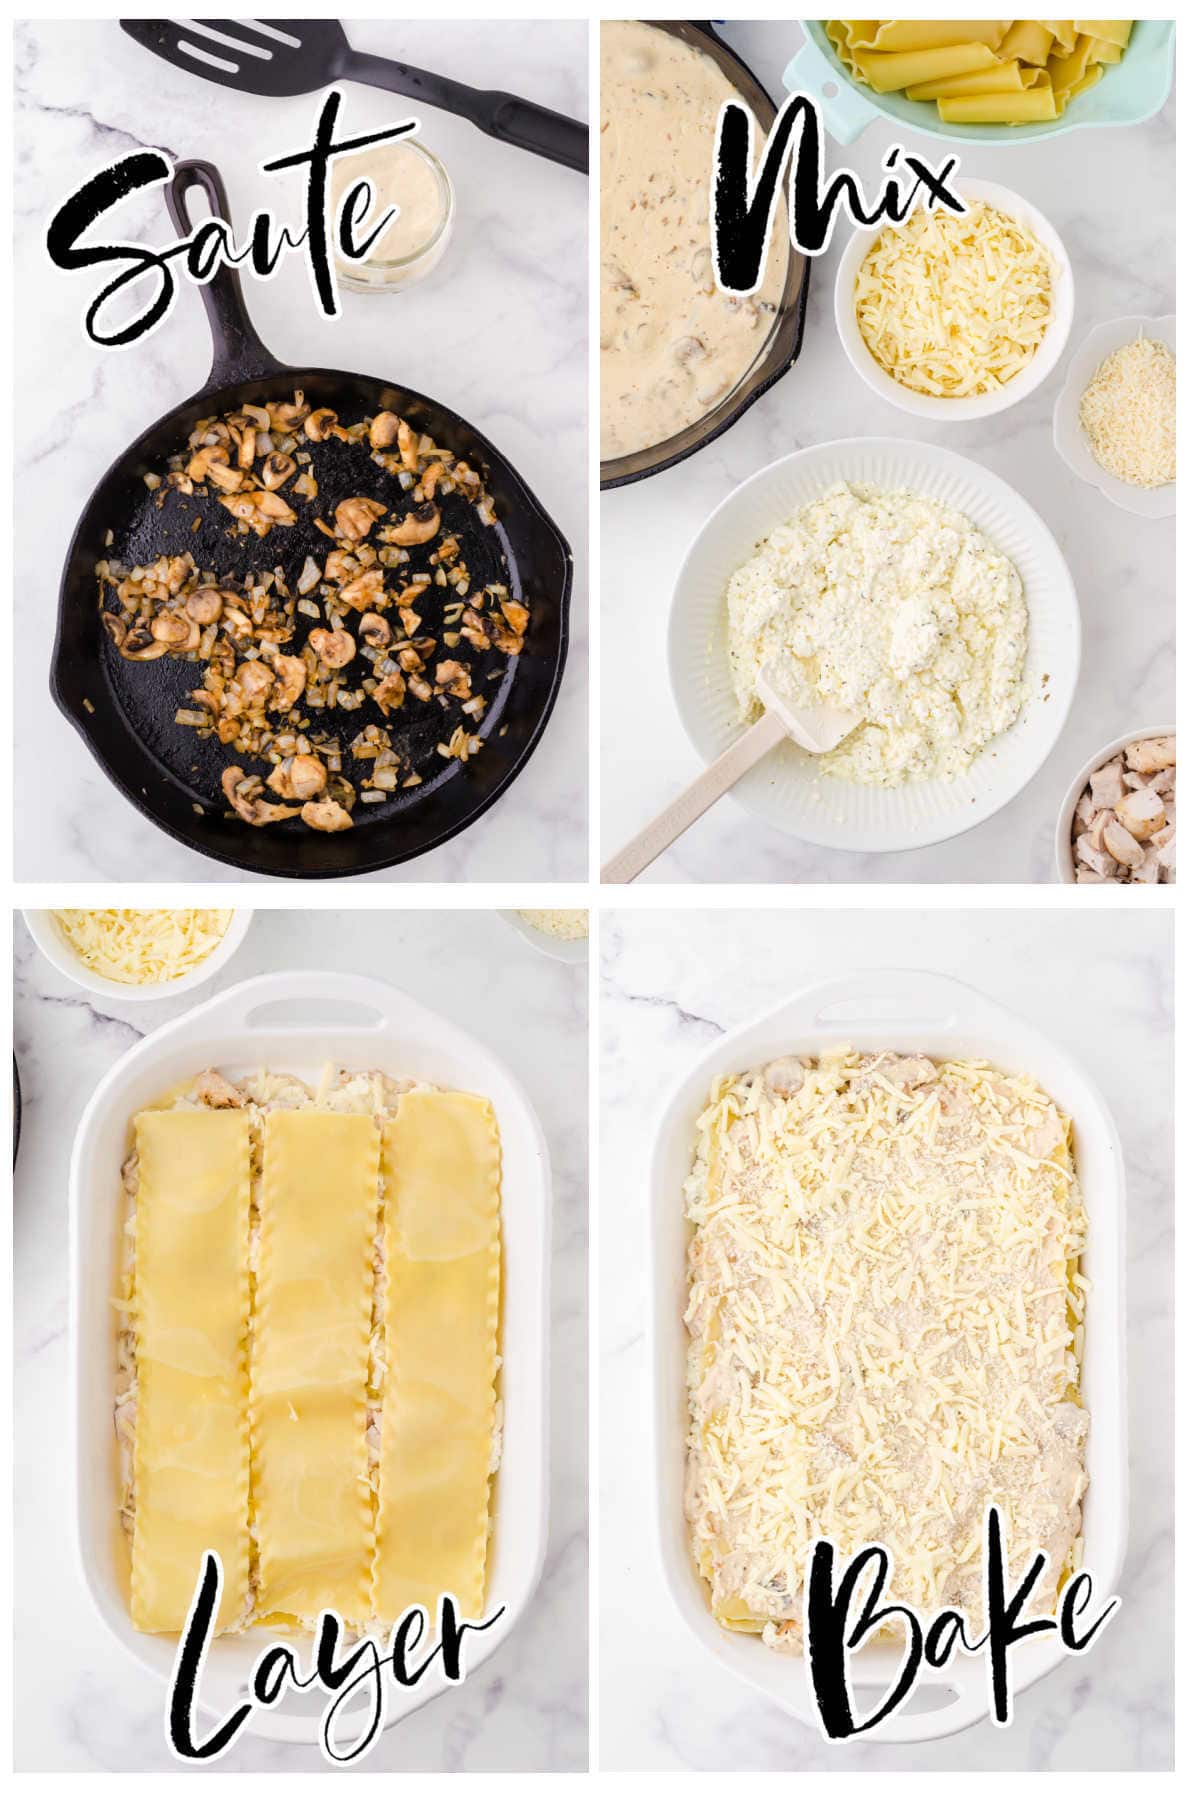 Step by step images for making chicken alfredo lasagna.